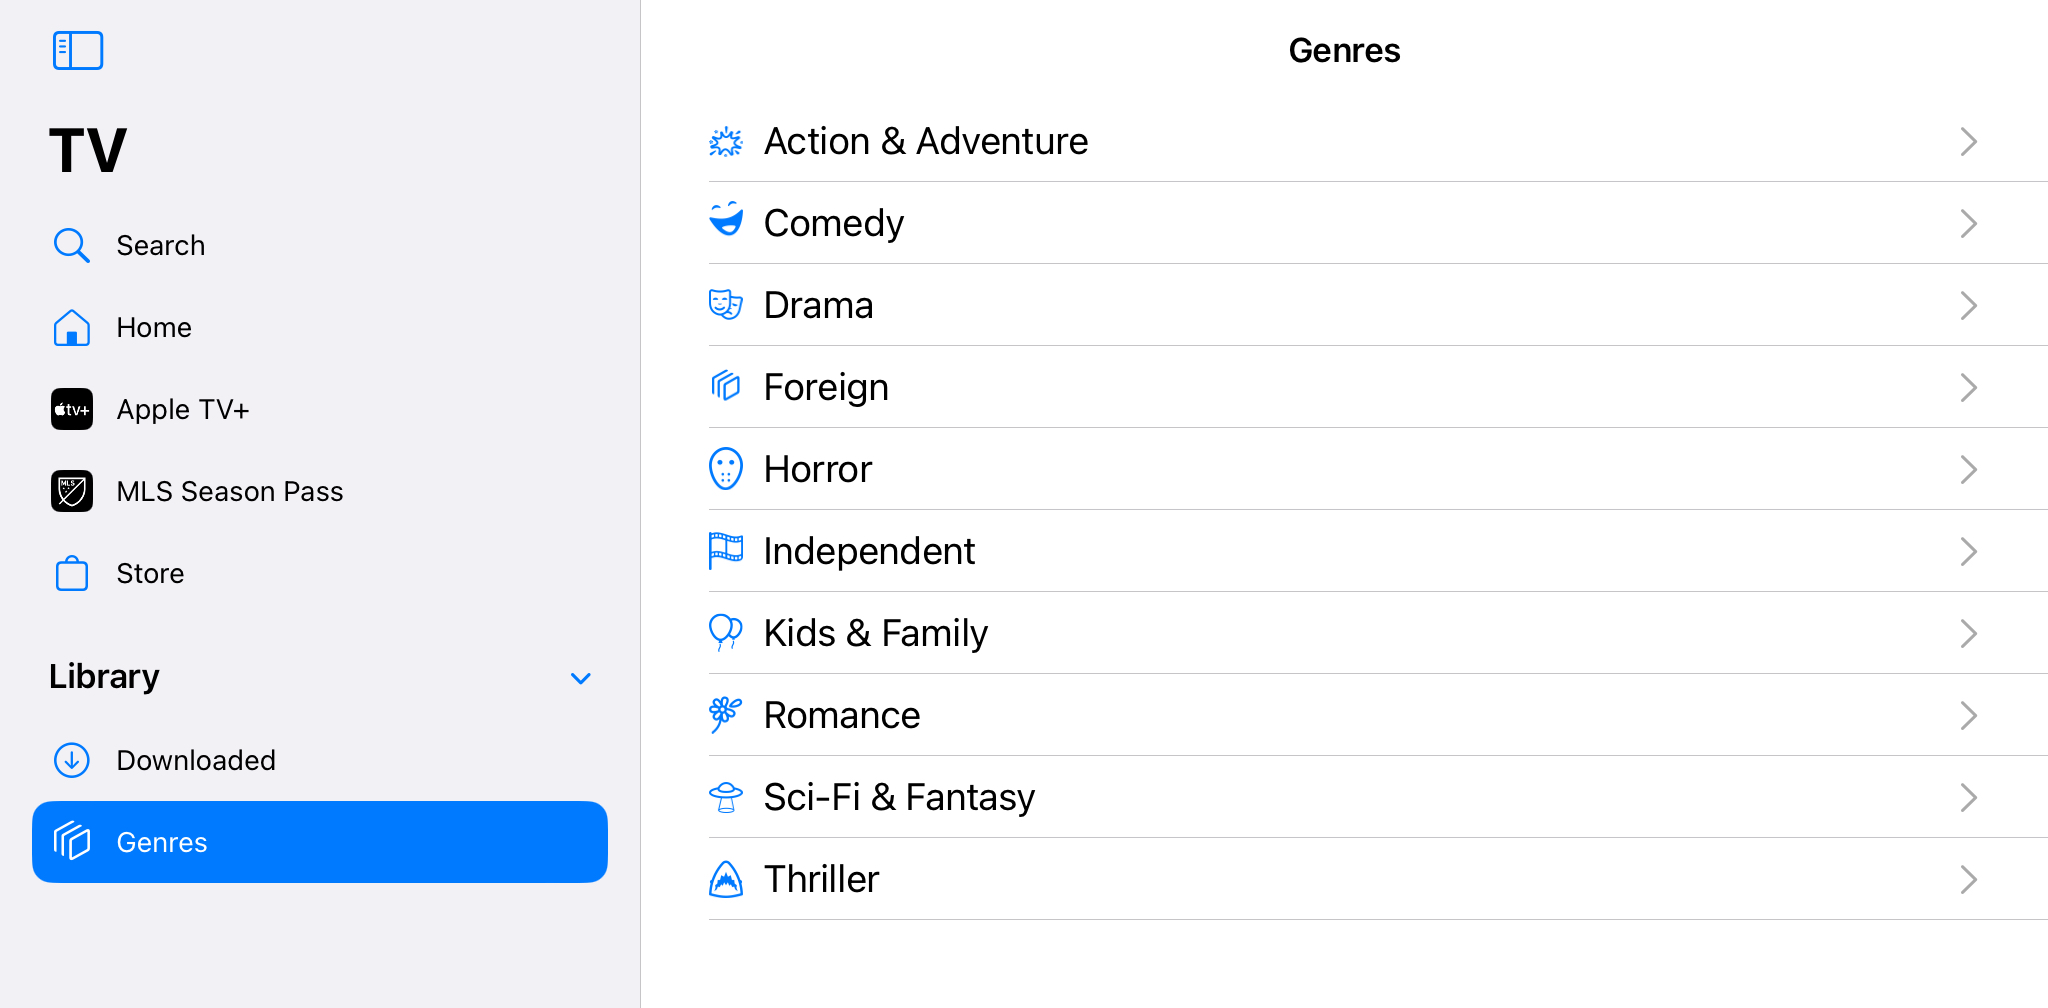 Screenshot of iPad TV app showing genres: Action & Adventure, Comedy, Drama, Foreign, Horror, Independent, Kids & Family, Romance, Sci-Fi & Fantasy, Thriller